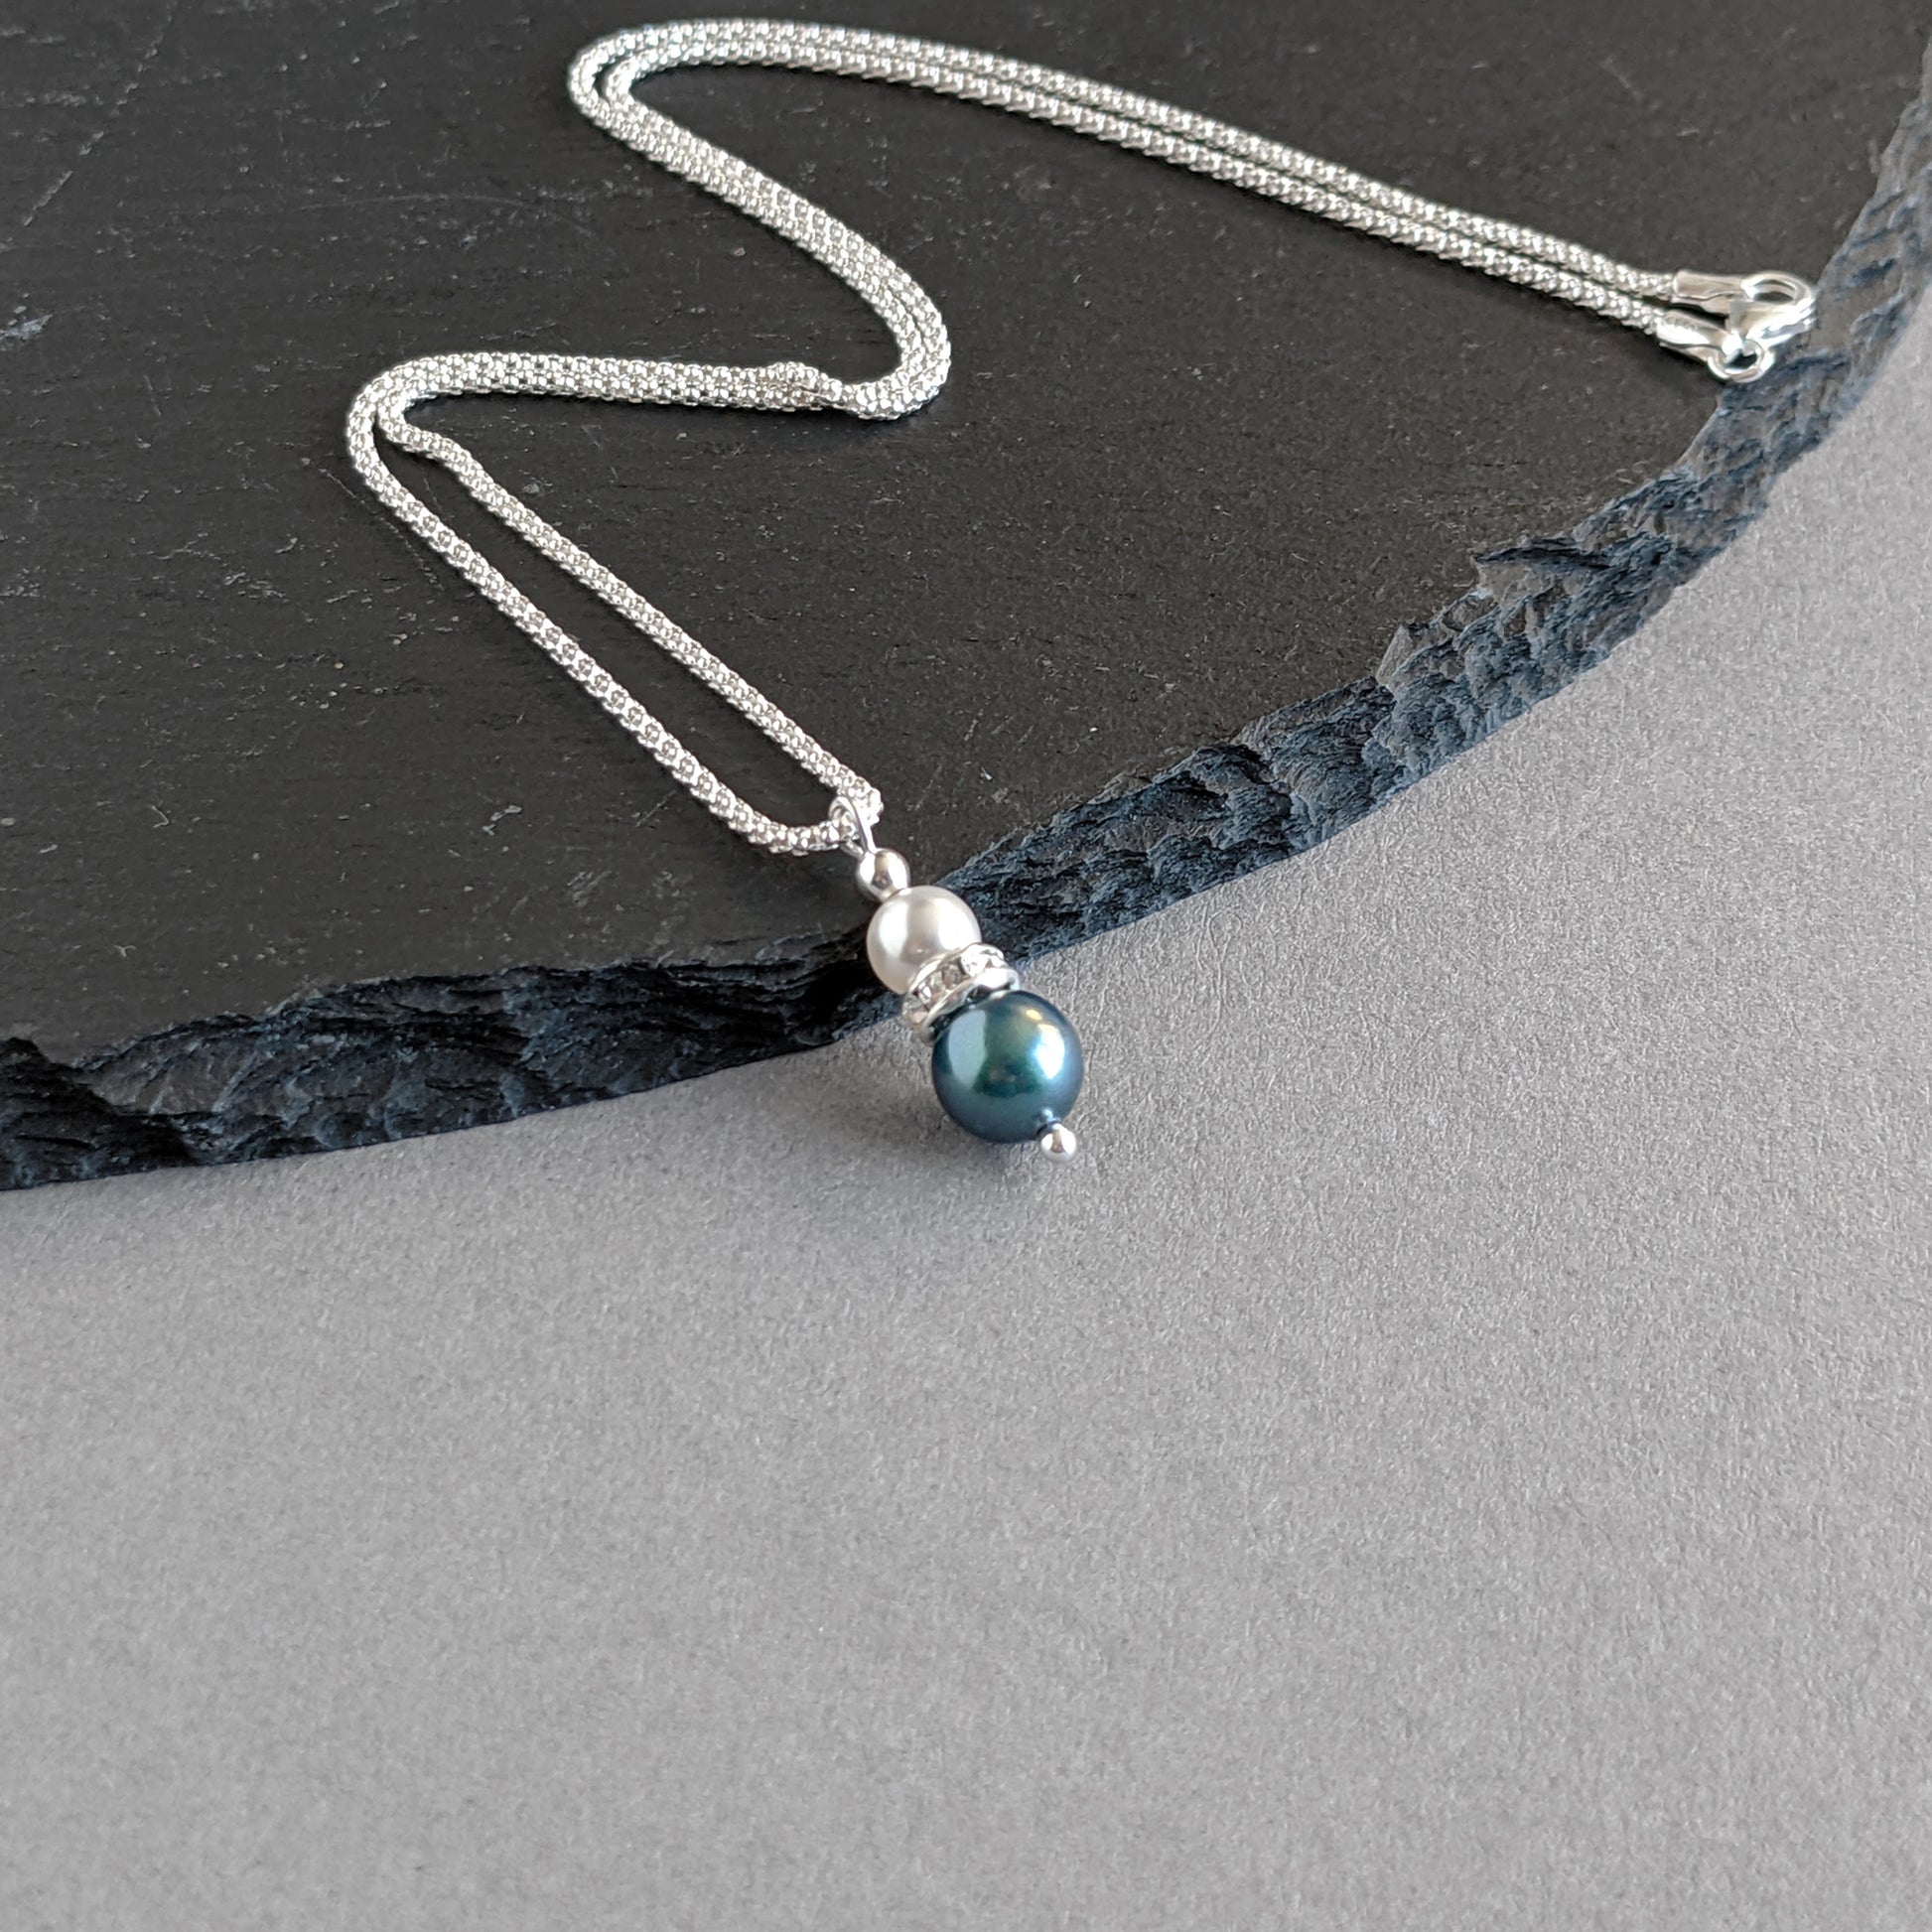 Teal pearl drop necklace